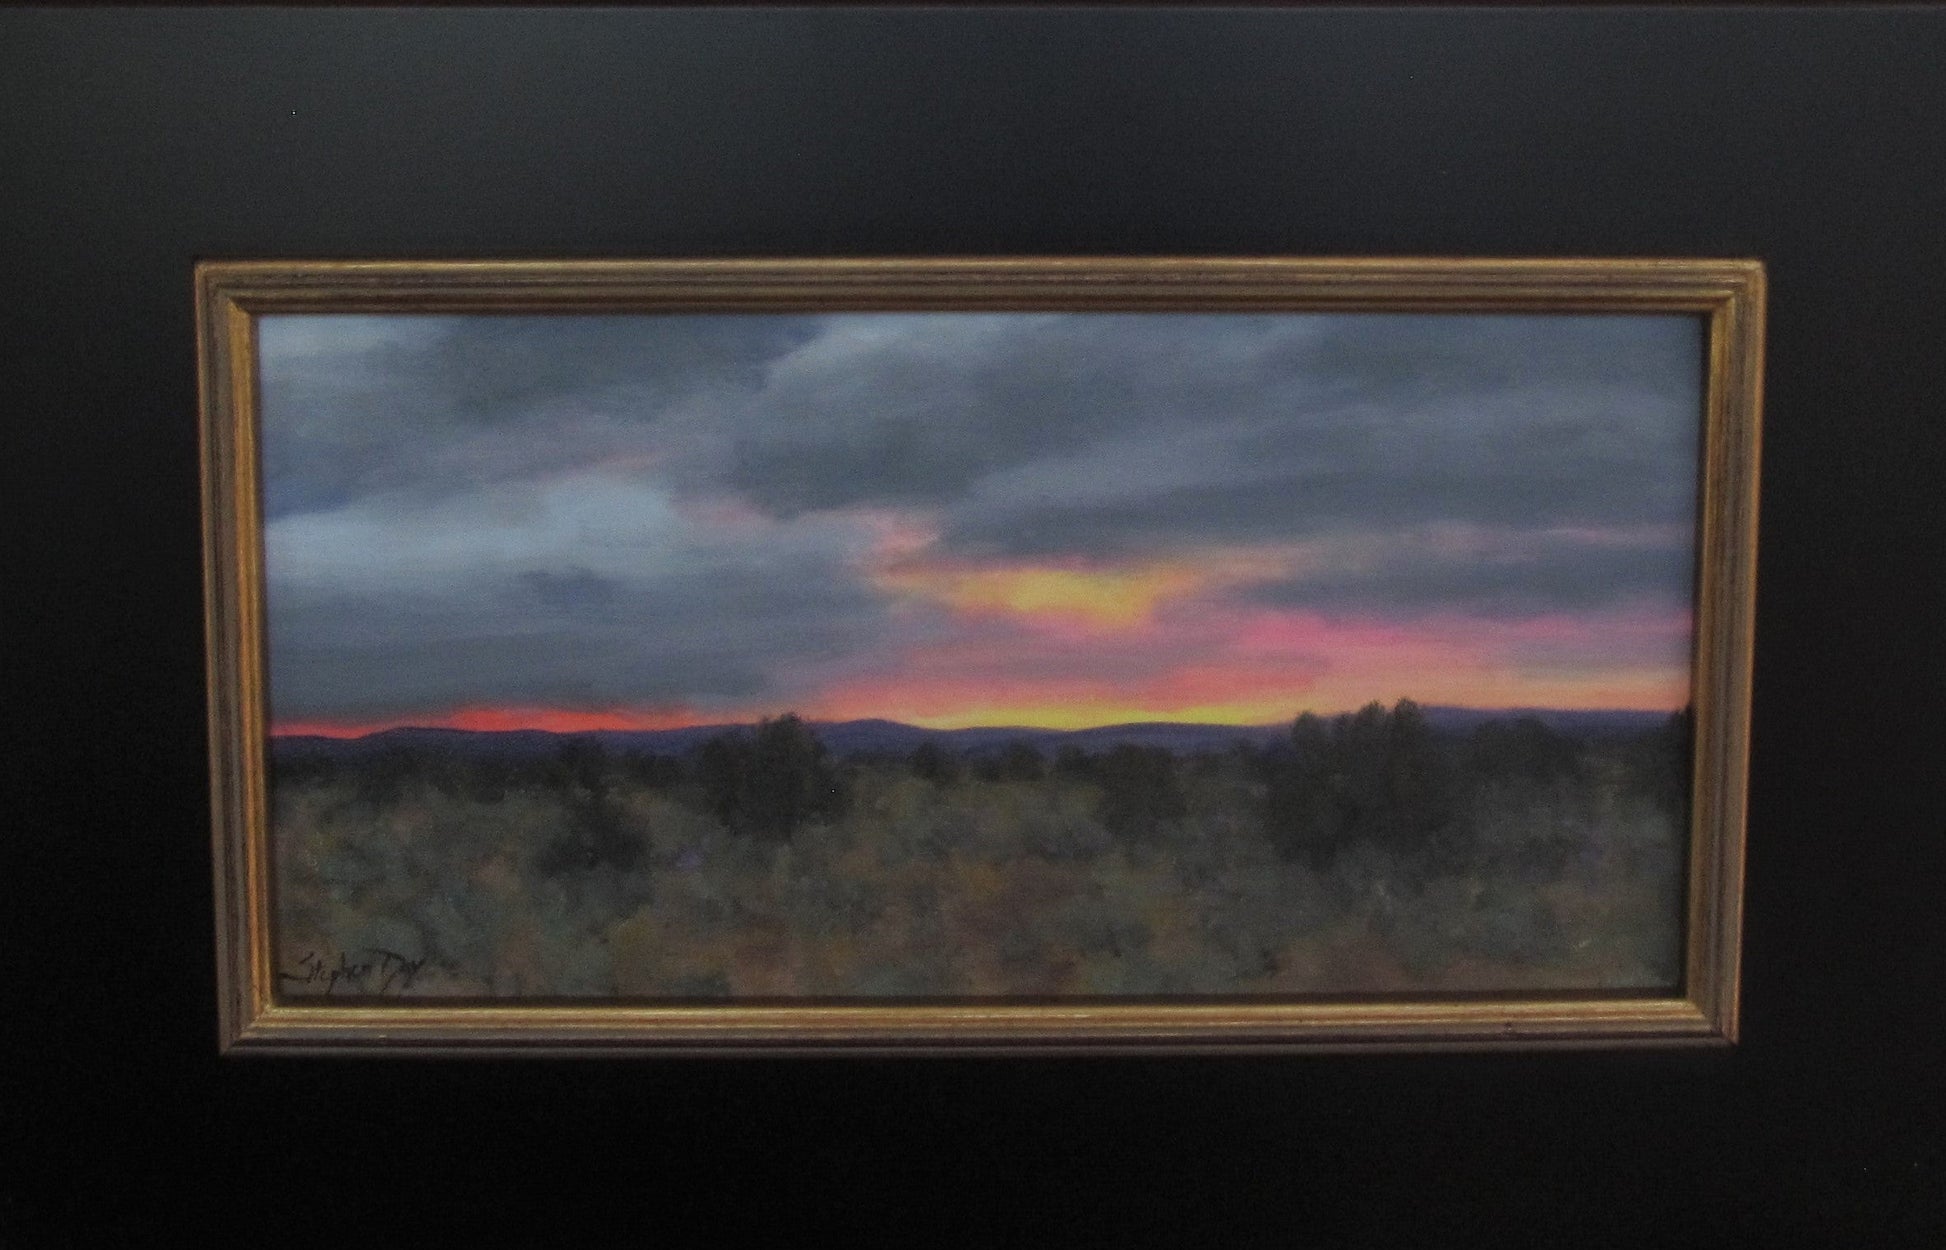 Evening's Final Moments-Painting-Stephen Day-Sorrel Sky Gallery